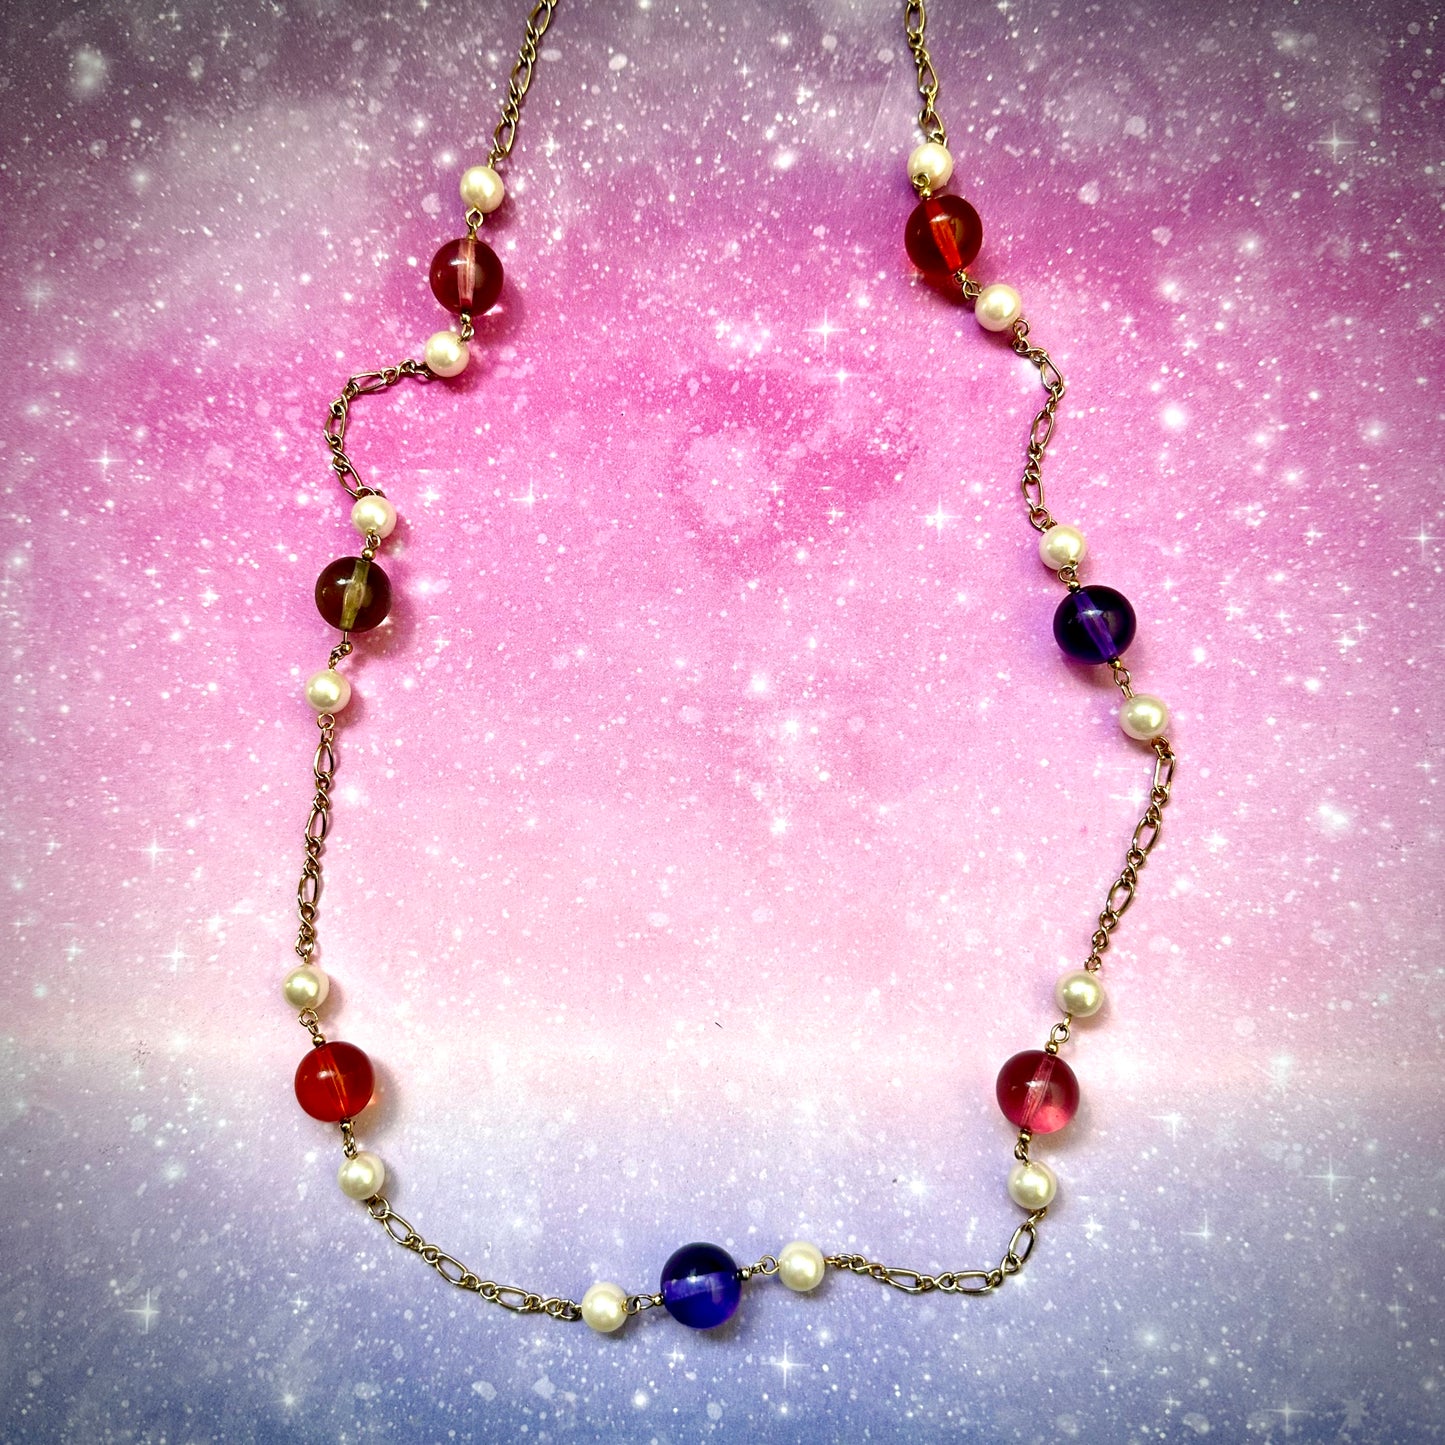 bubbles and baubles chain necklace